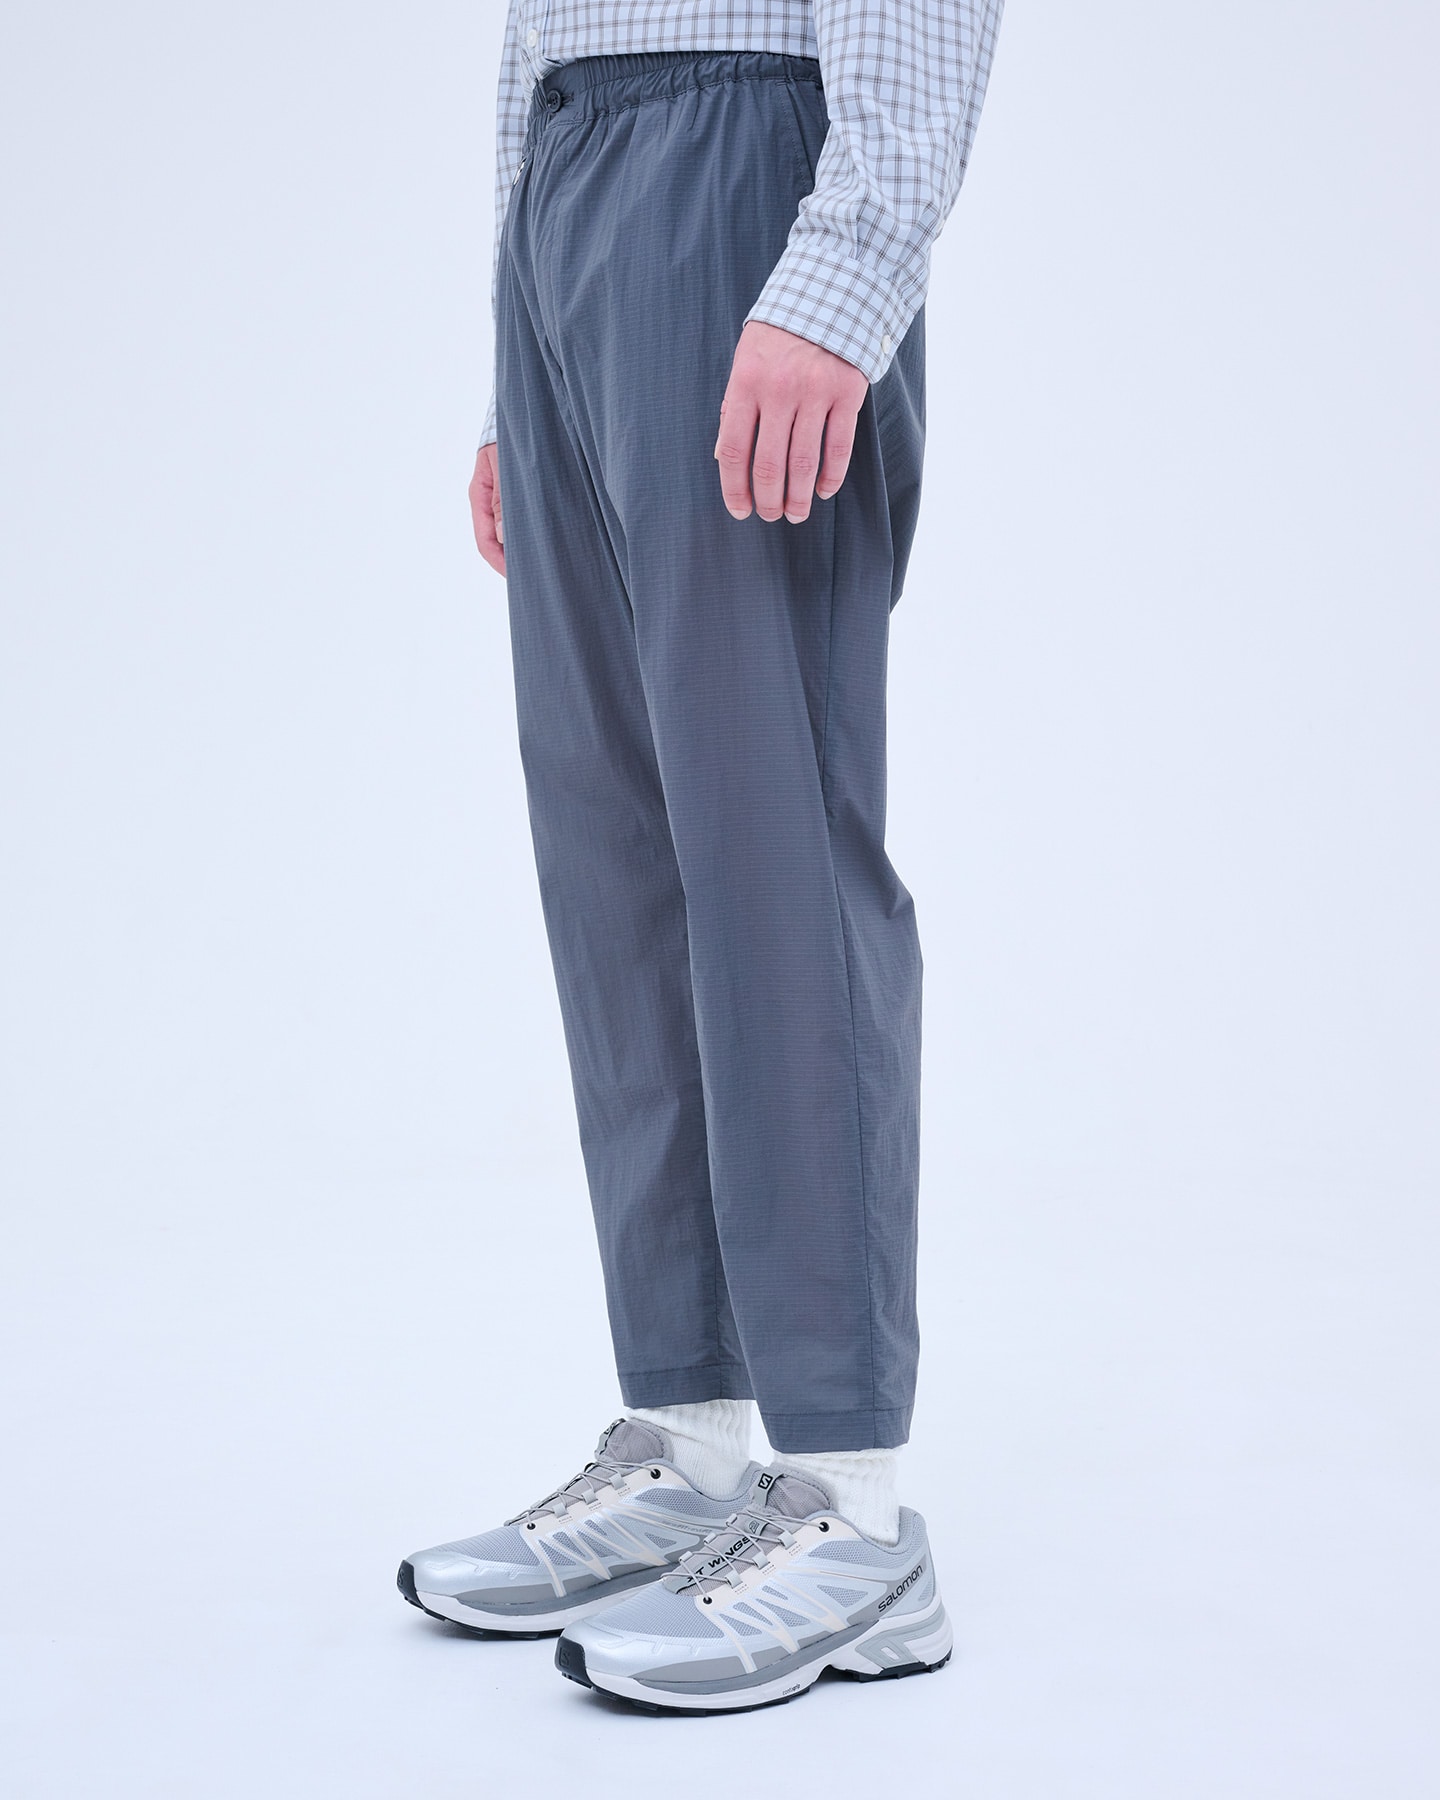 SOPH. | LIGHT WEIGHT STRETCH RIP STOP TAPERED EASY PANTS(M BLACK):